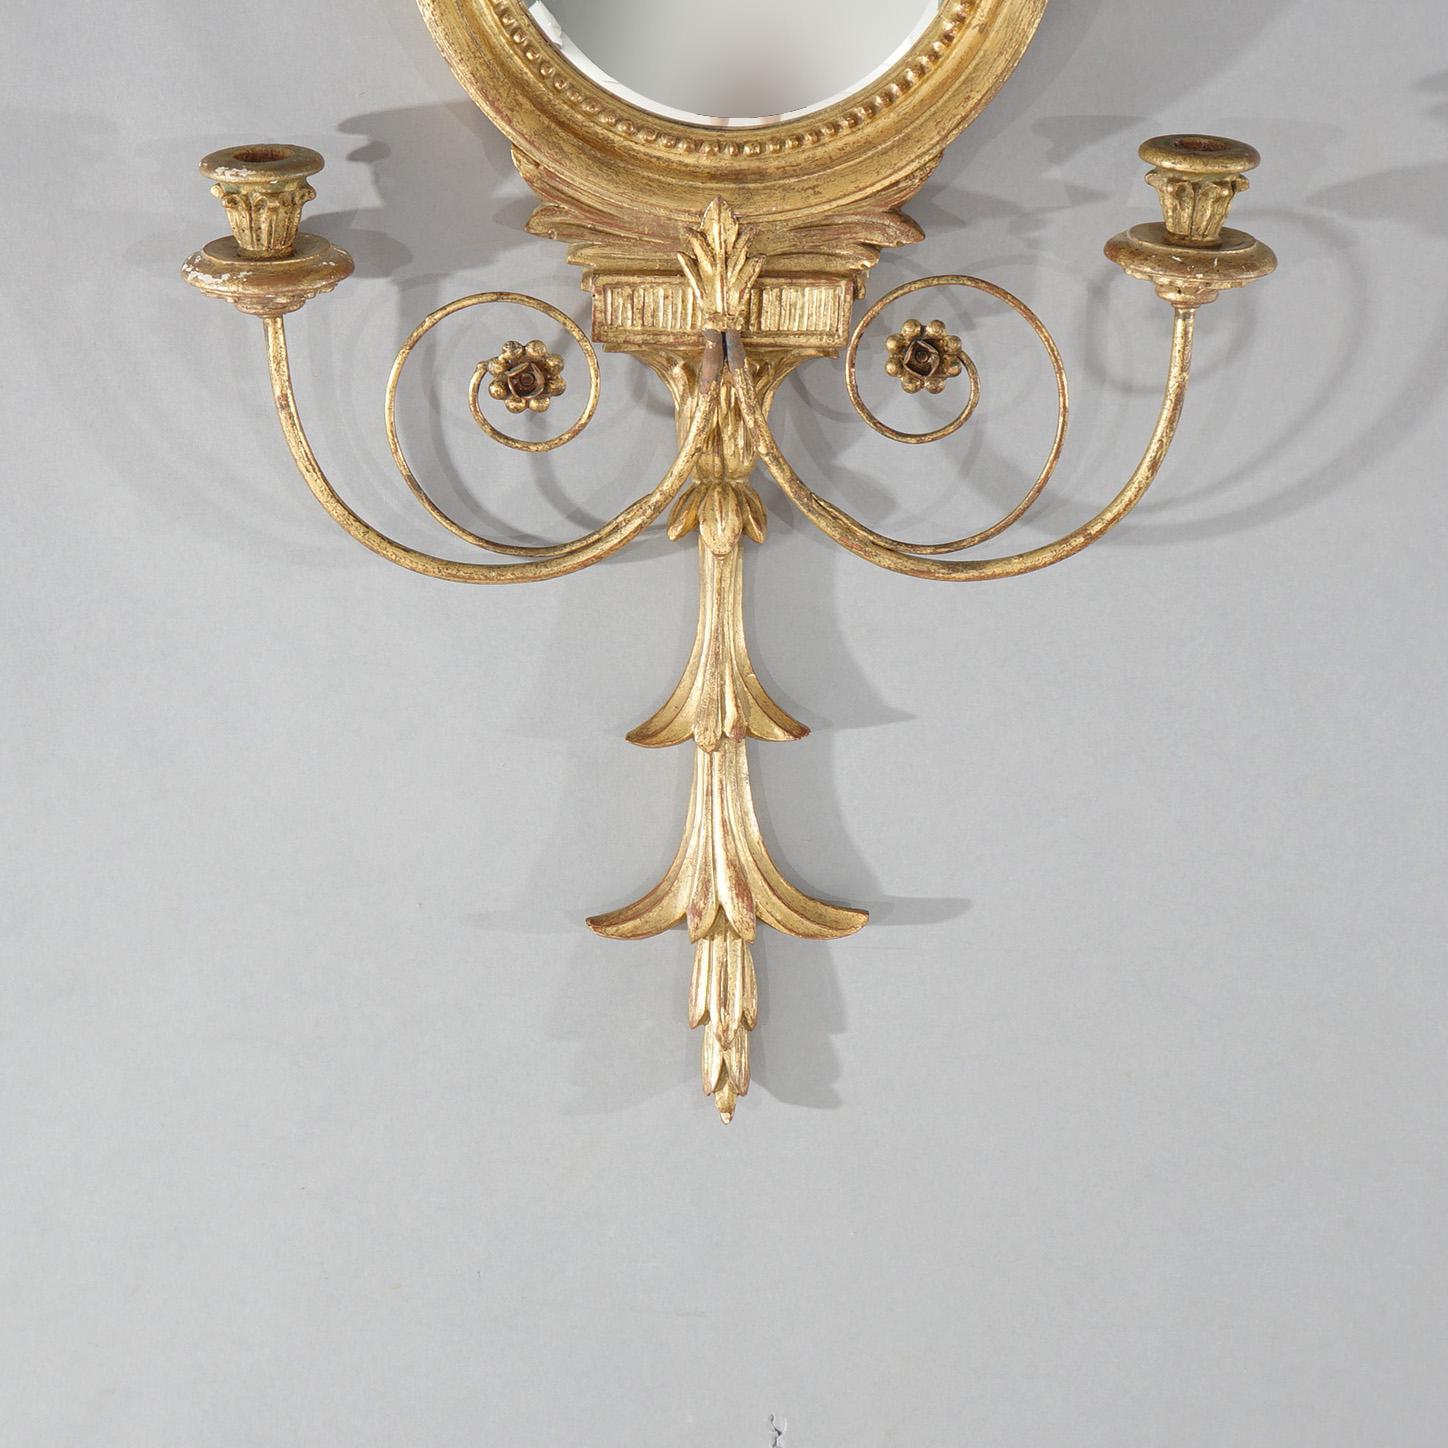 Federal Antique Classical Italian Giltwood Figural Bullseye Wall Mirror with Eagle 1920 For Sale